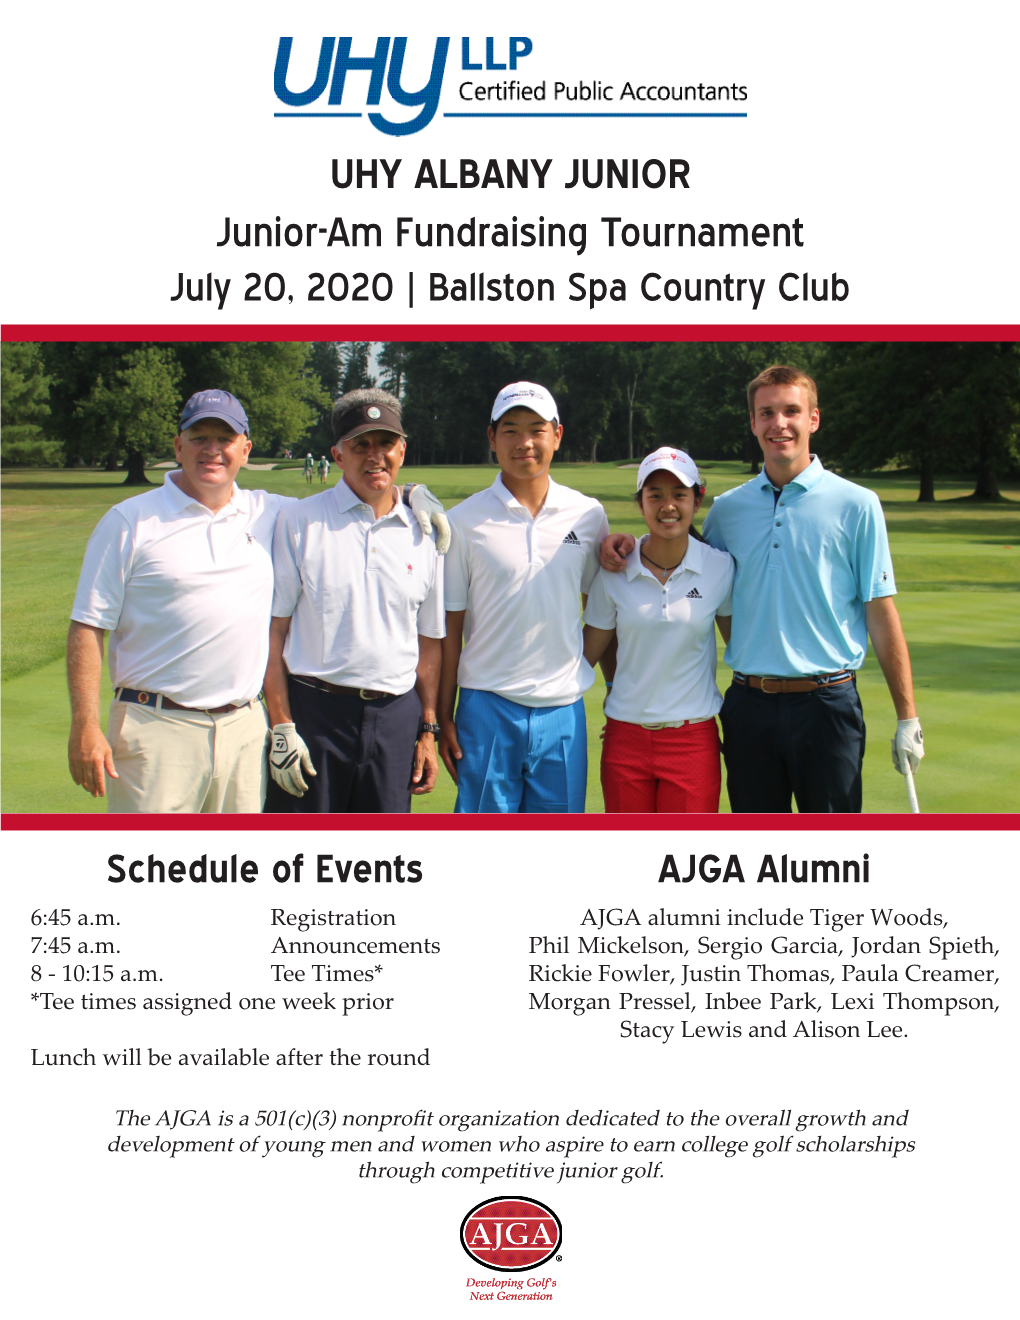 UHY ALBANY JUNIOR Junior-Am Fundraising Tournament July 20, 2020 | Ballston Spa Country Club